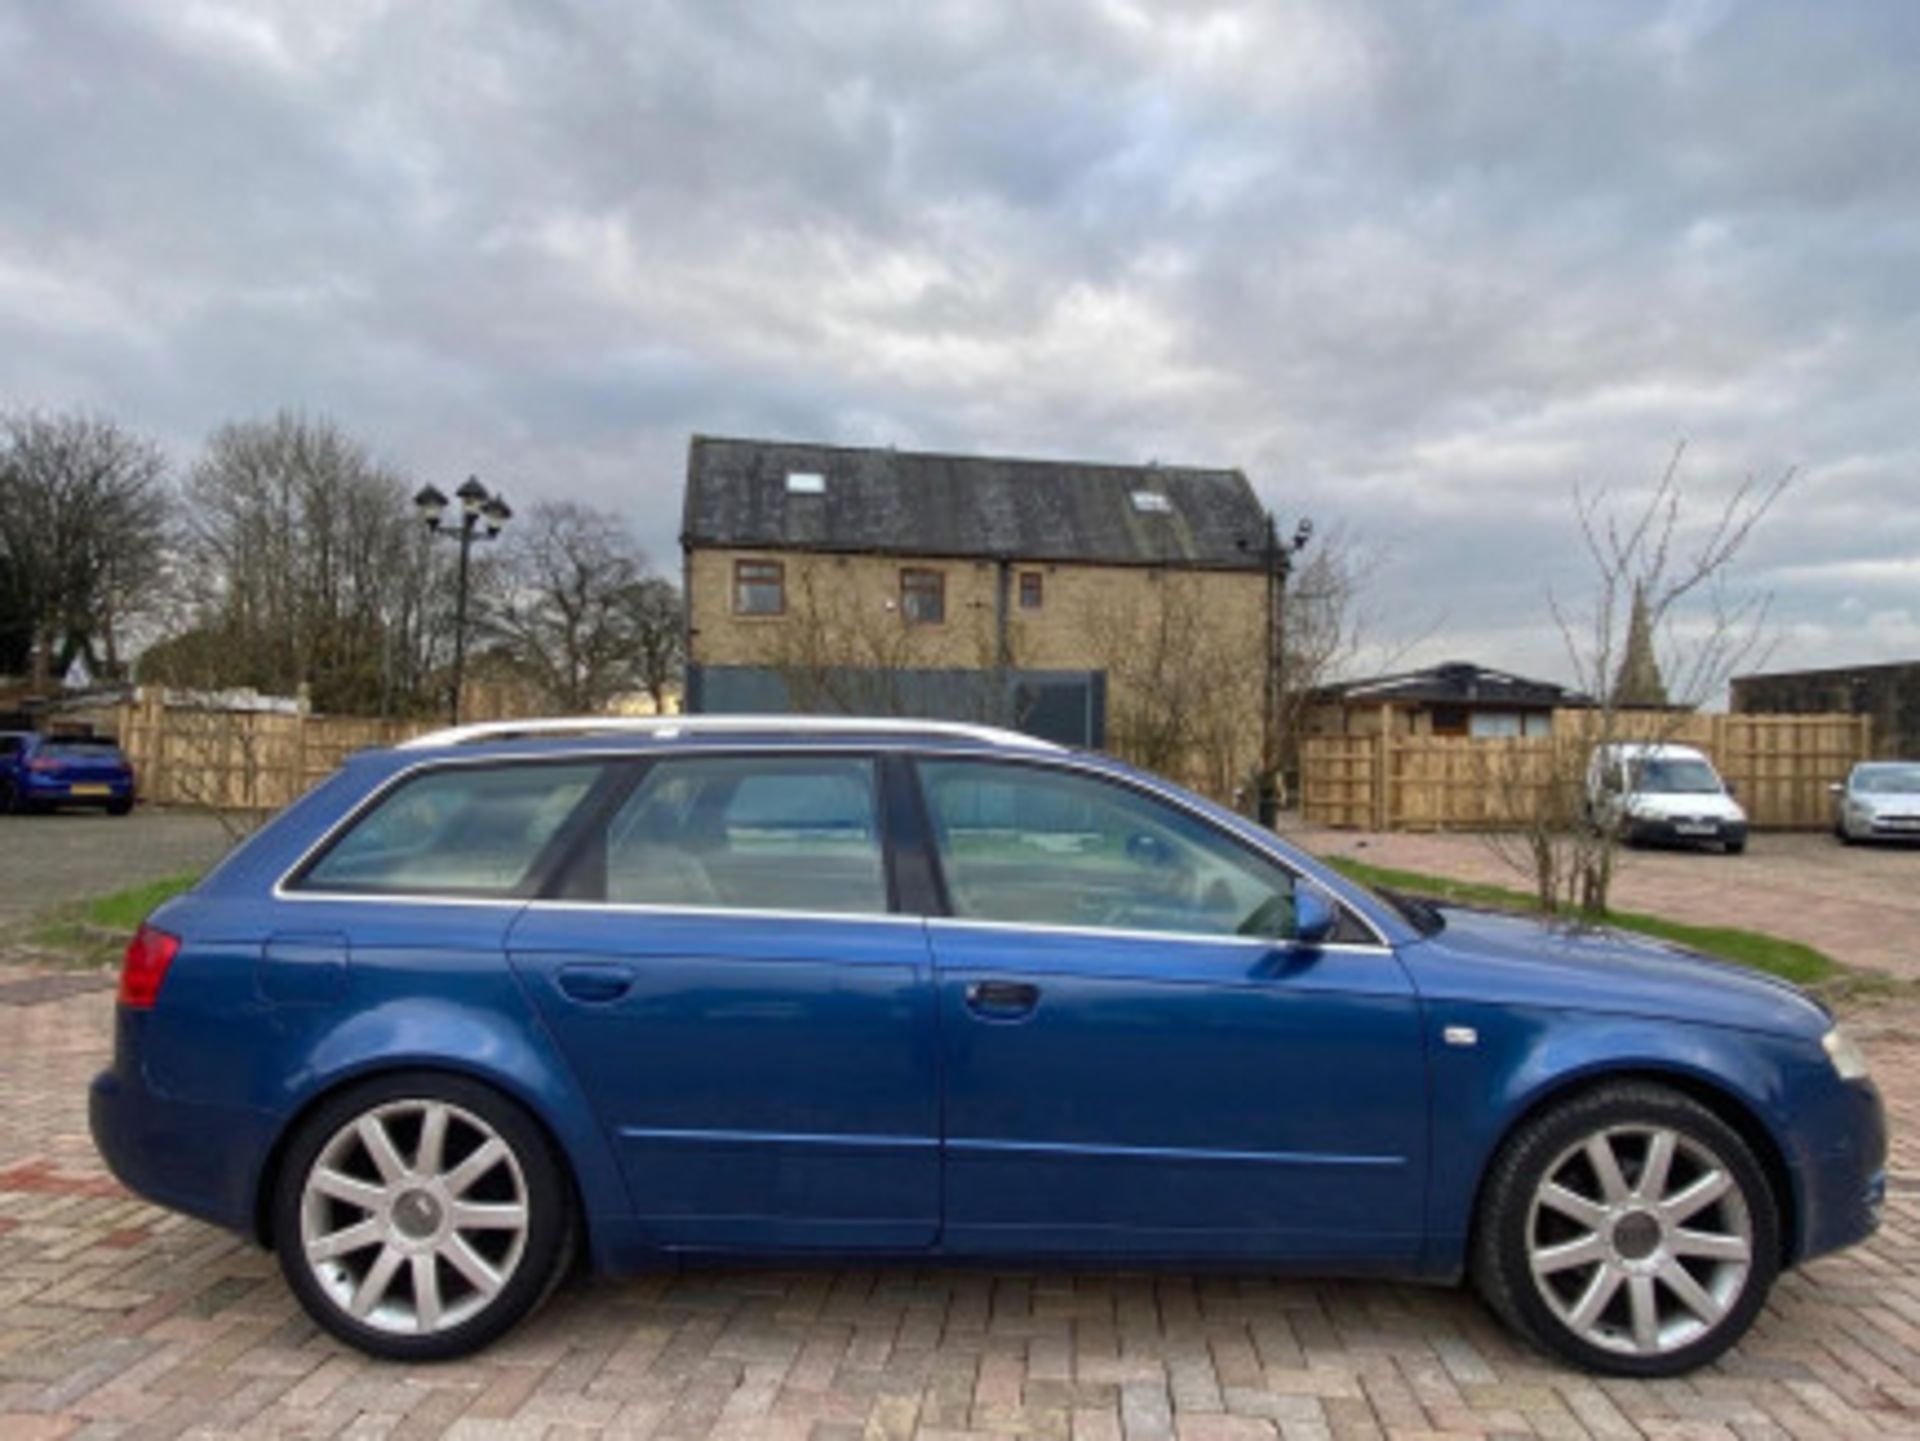 AUDI A4 AVANT 1.9 TDI SE 5DR ESTATE - RARE AND RELIABLE LUXURY WAGON >>--NO VAT ON HAMMER--<< - Image 28 of 63